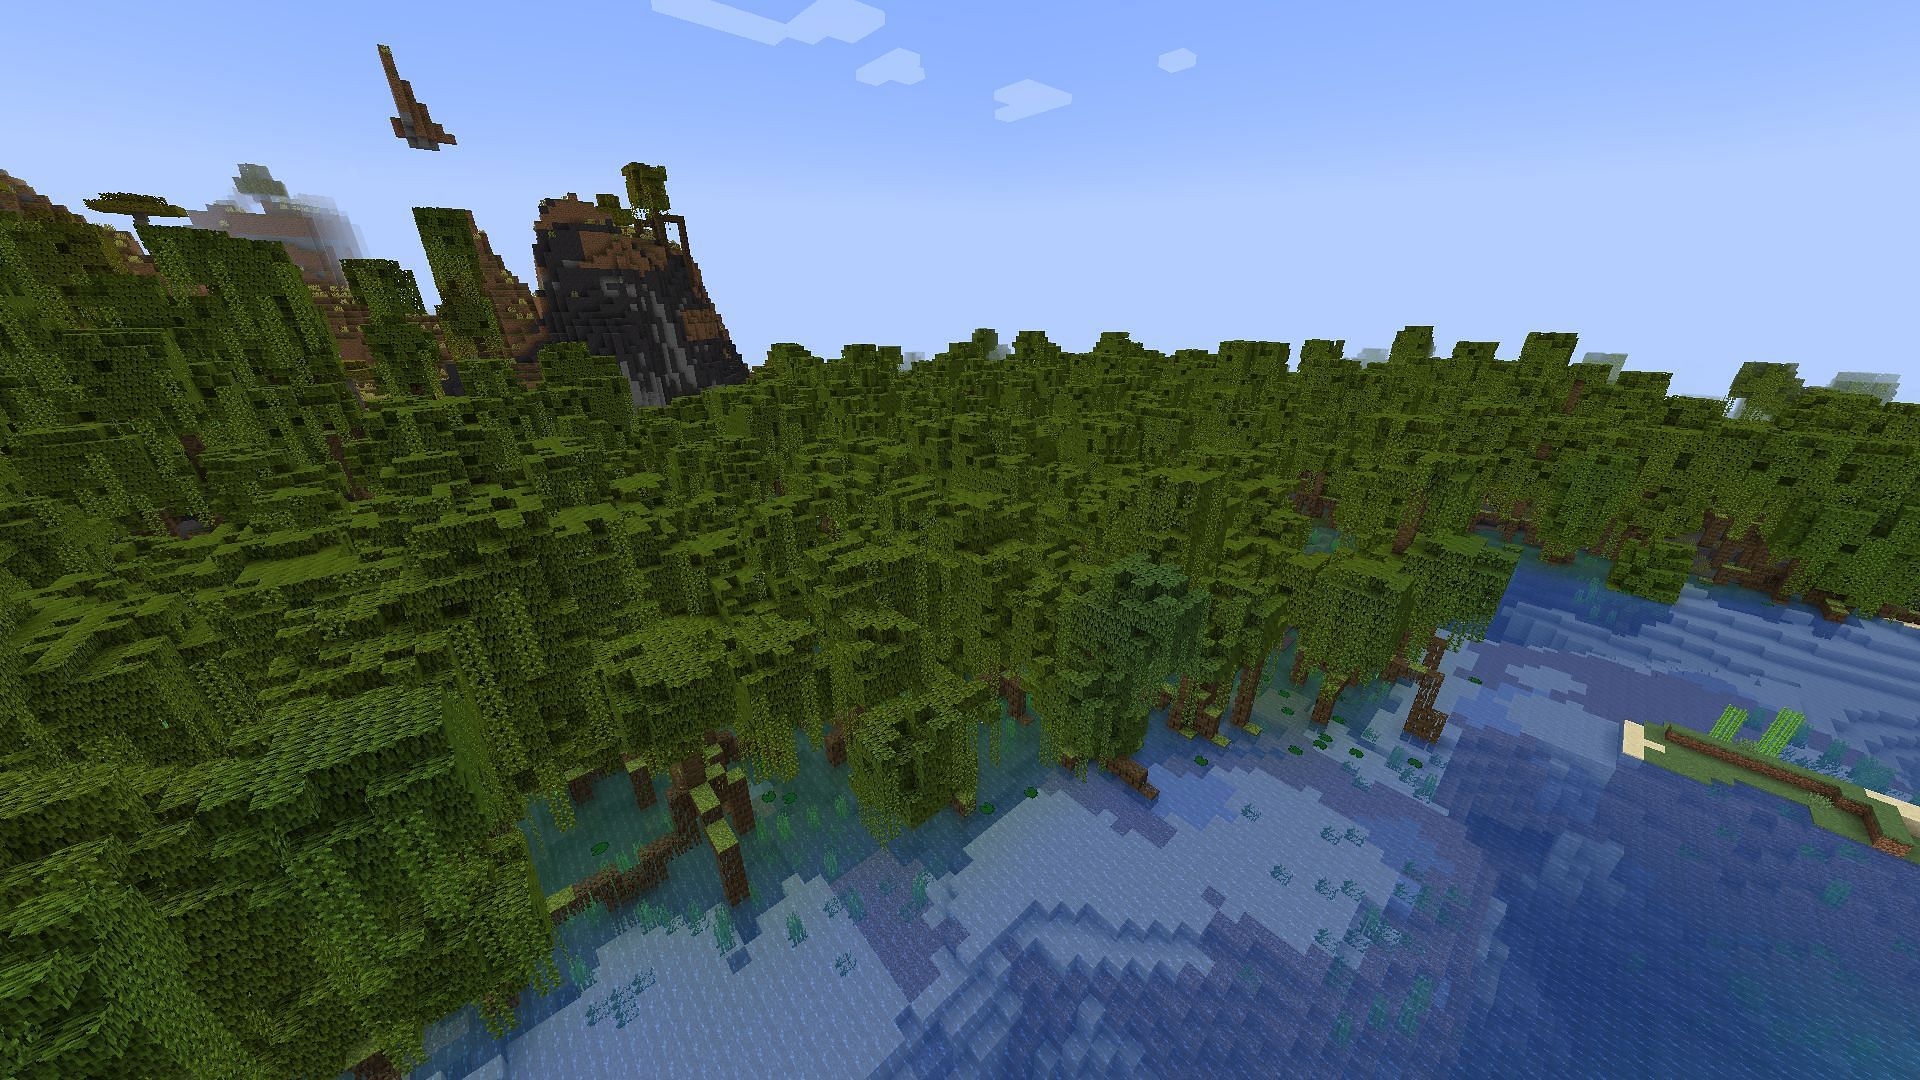 Massive mangrove swamp not far from spawn in Minecraft (Image via Mojang)